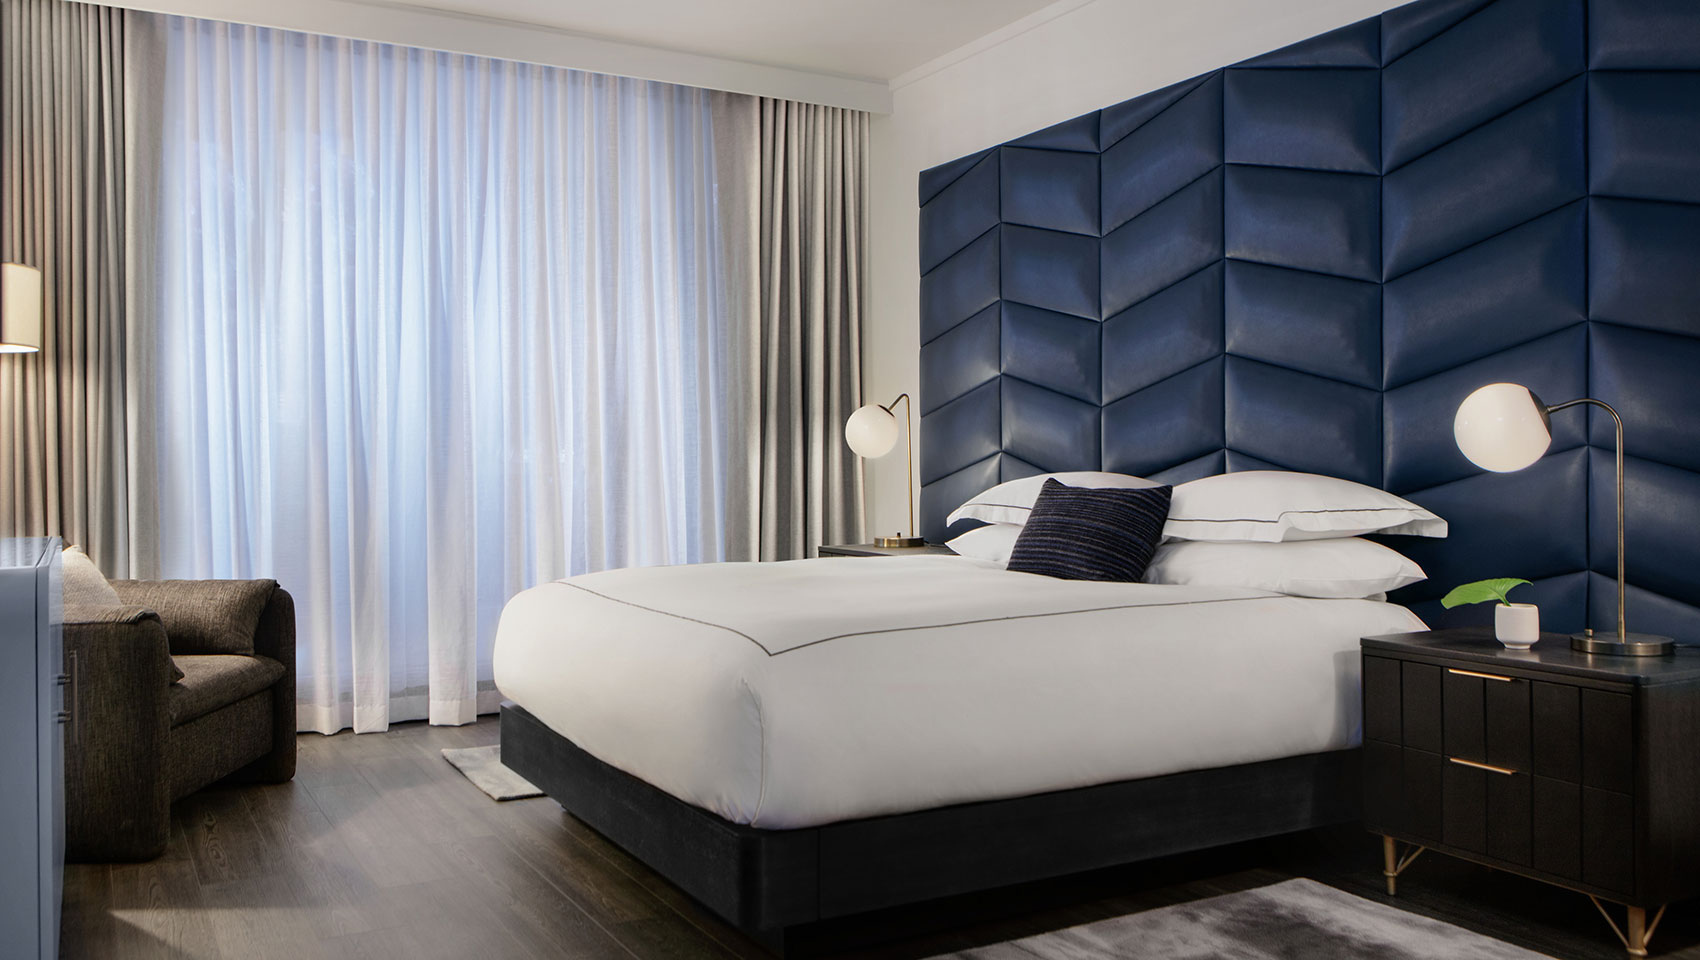 Kimpton Shane guestroom with blue headboard and large window